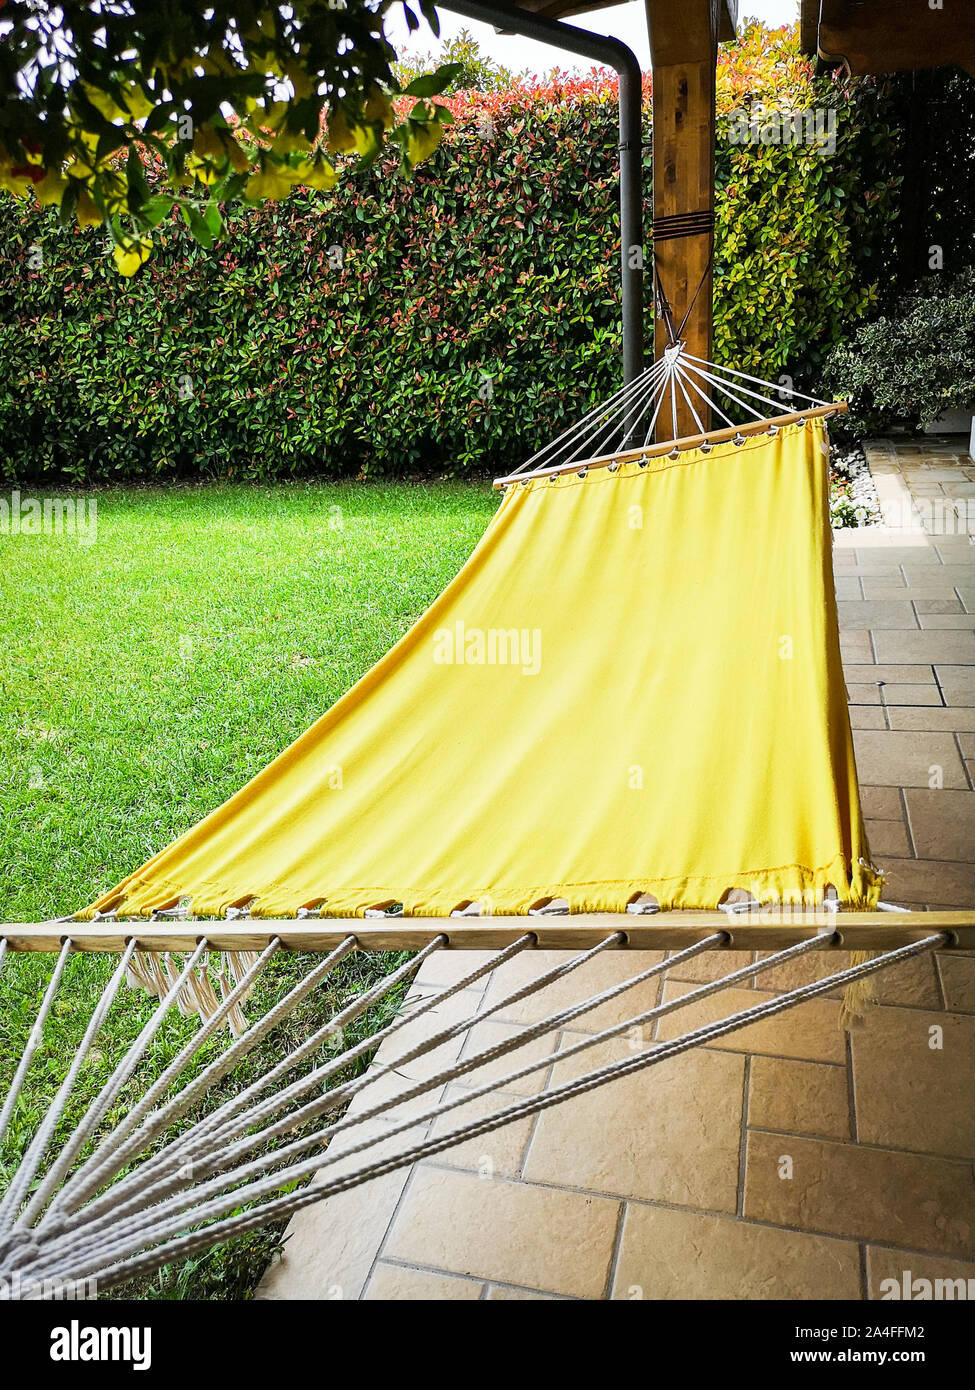 Yellow hammock in the garden of a country house. Stock Photo